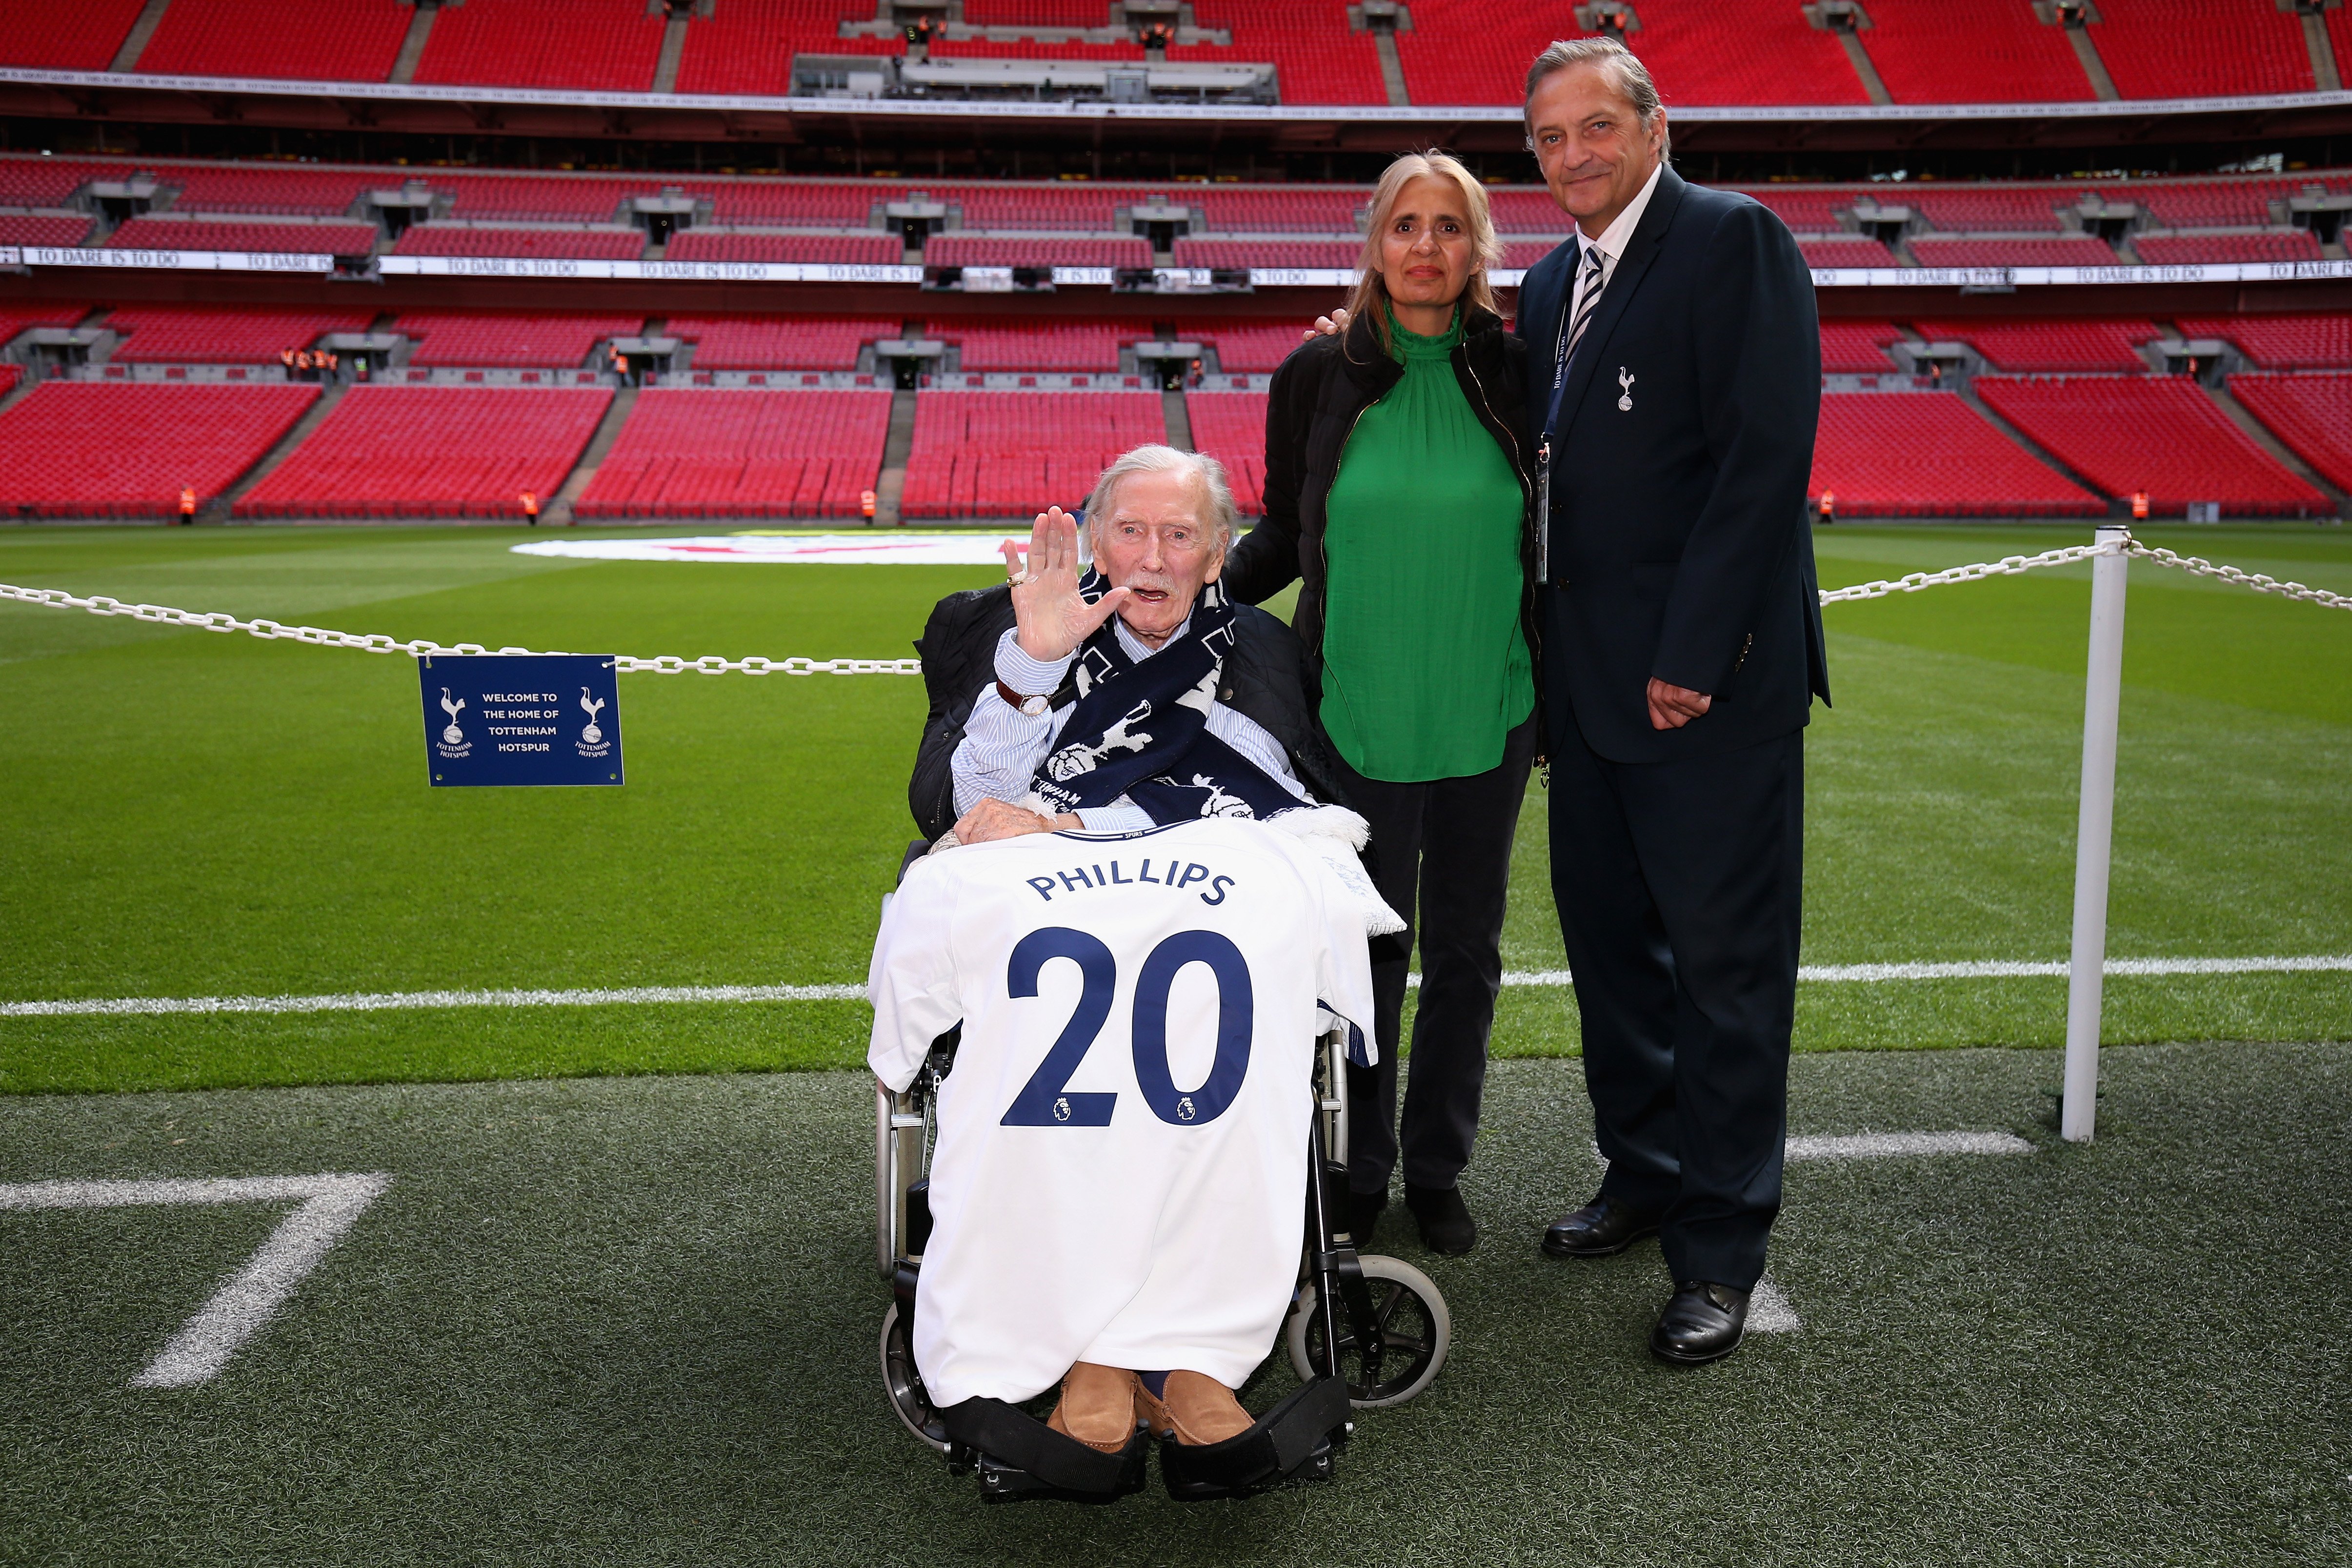 Leslie Phillips and Zara Carr pose for a photo with Gary Mabbutt prior to the Premier League match on September 16, 2017, in London, England | Source: Getty Images